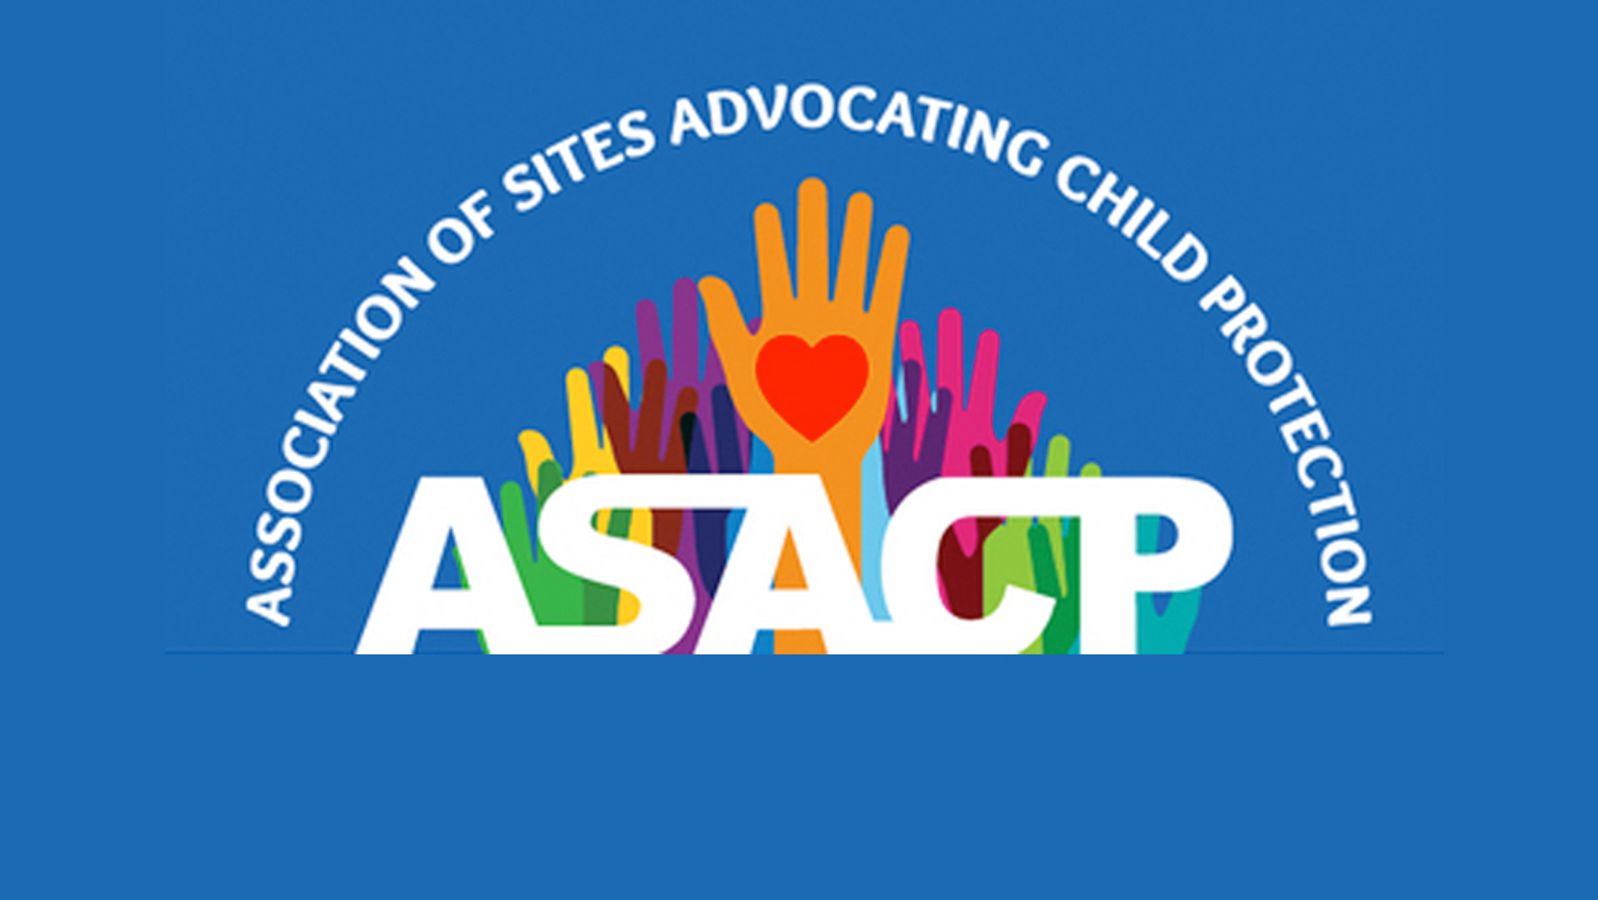 Association of Sites Advocating Child Protection (ASACP)